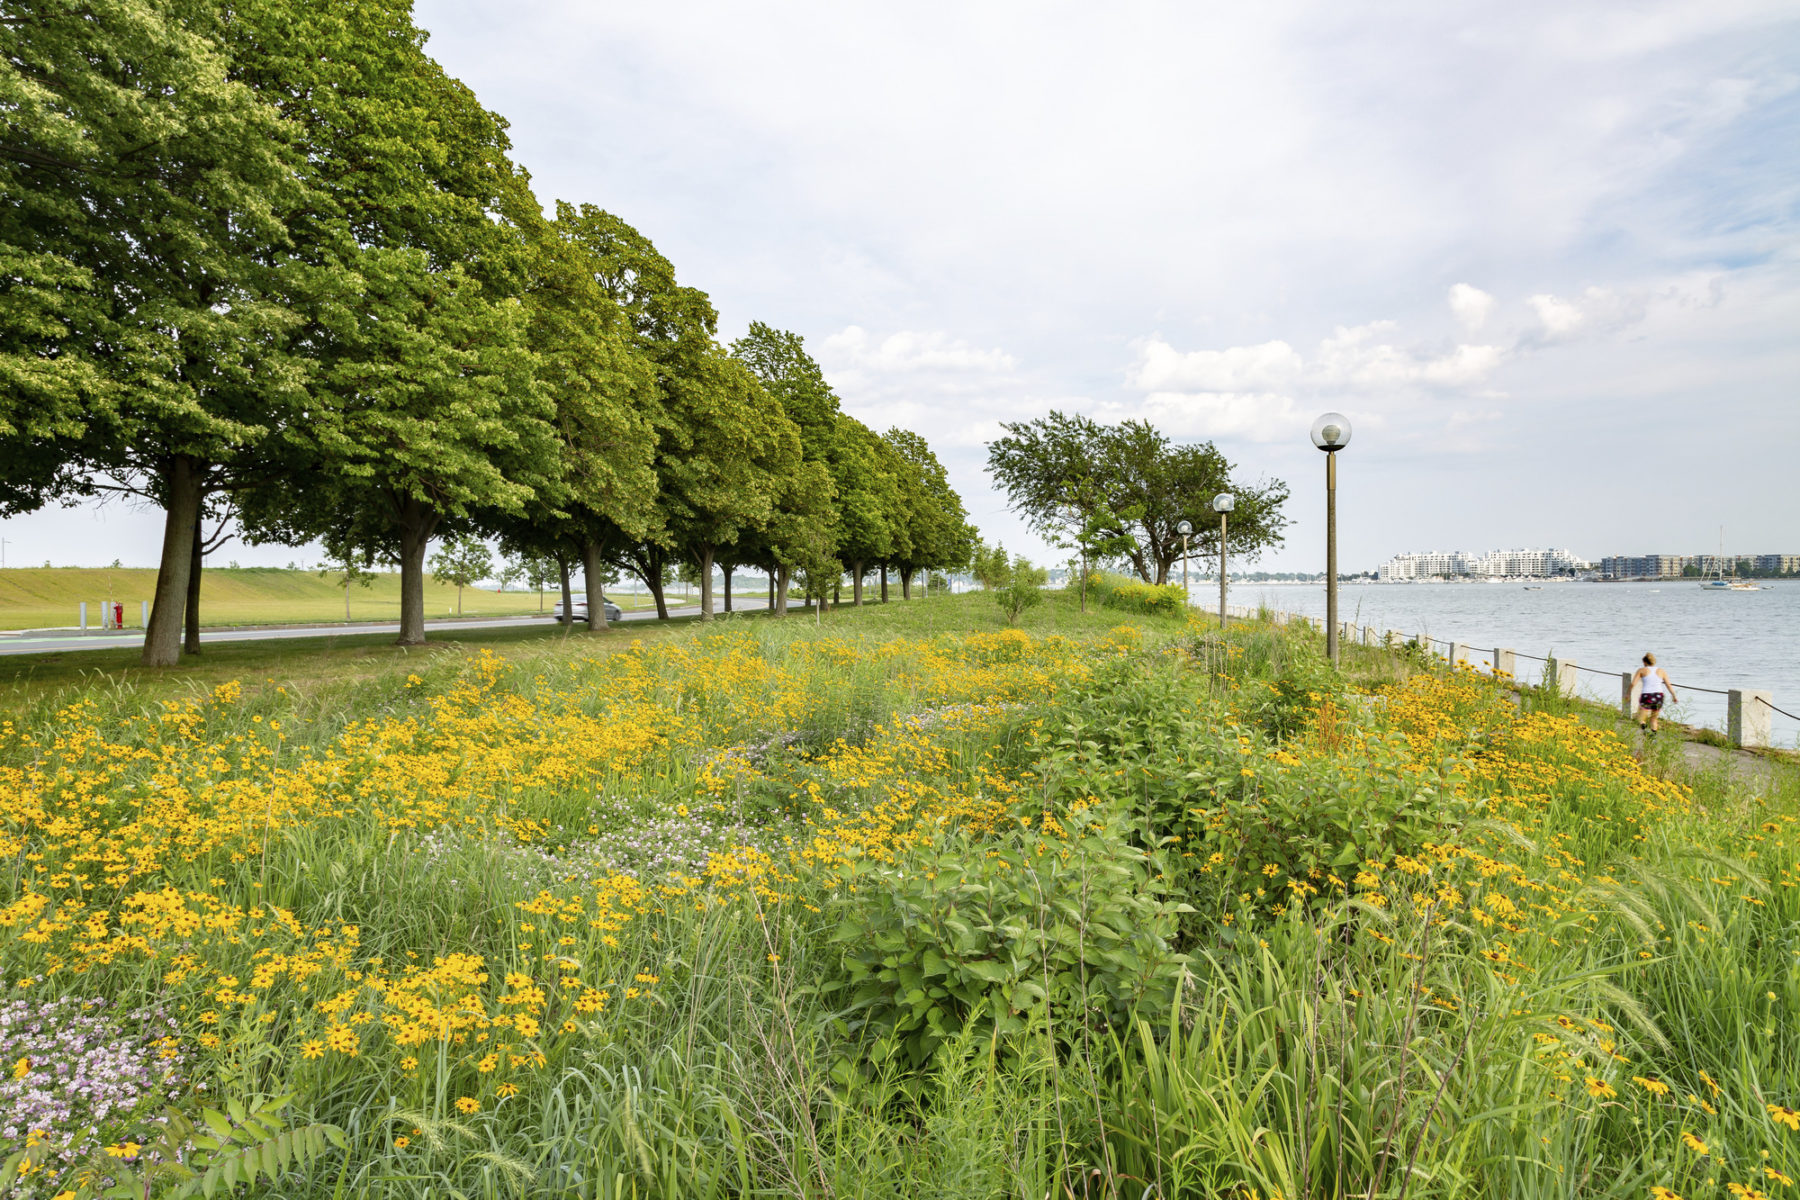 A lush landscape full of yellow wildflowers at the ocean's edge